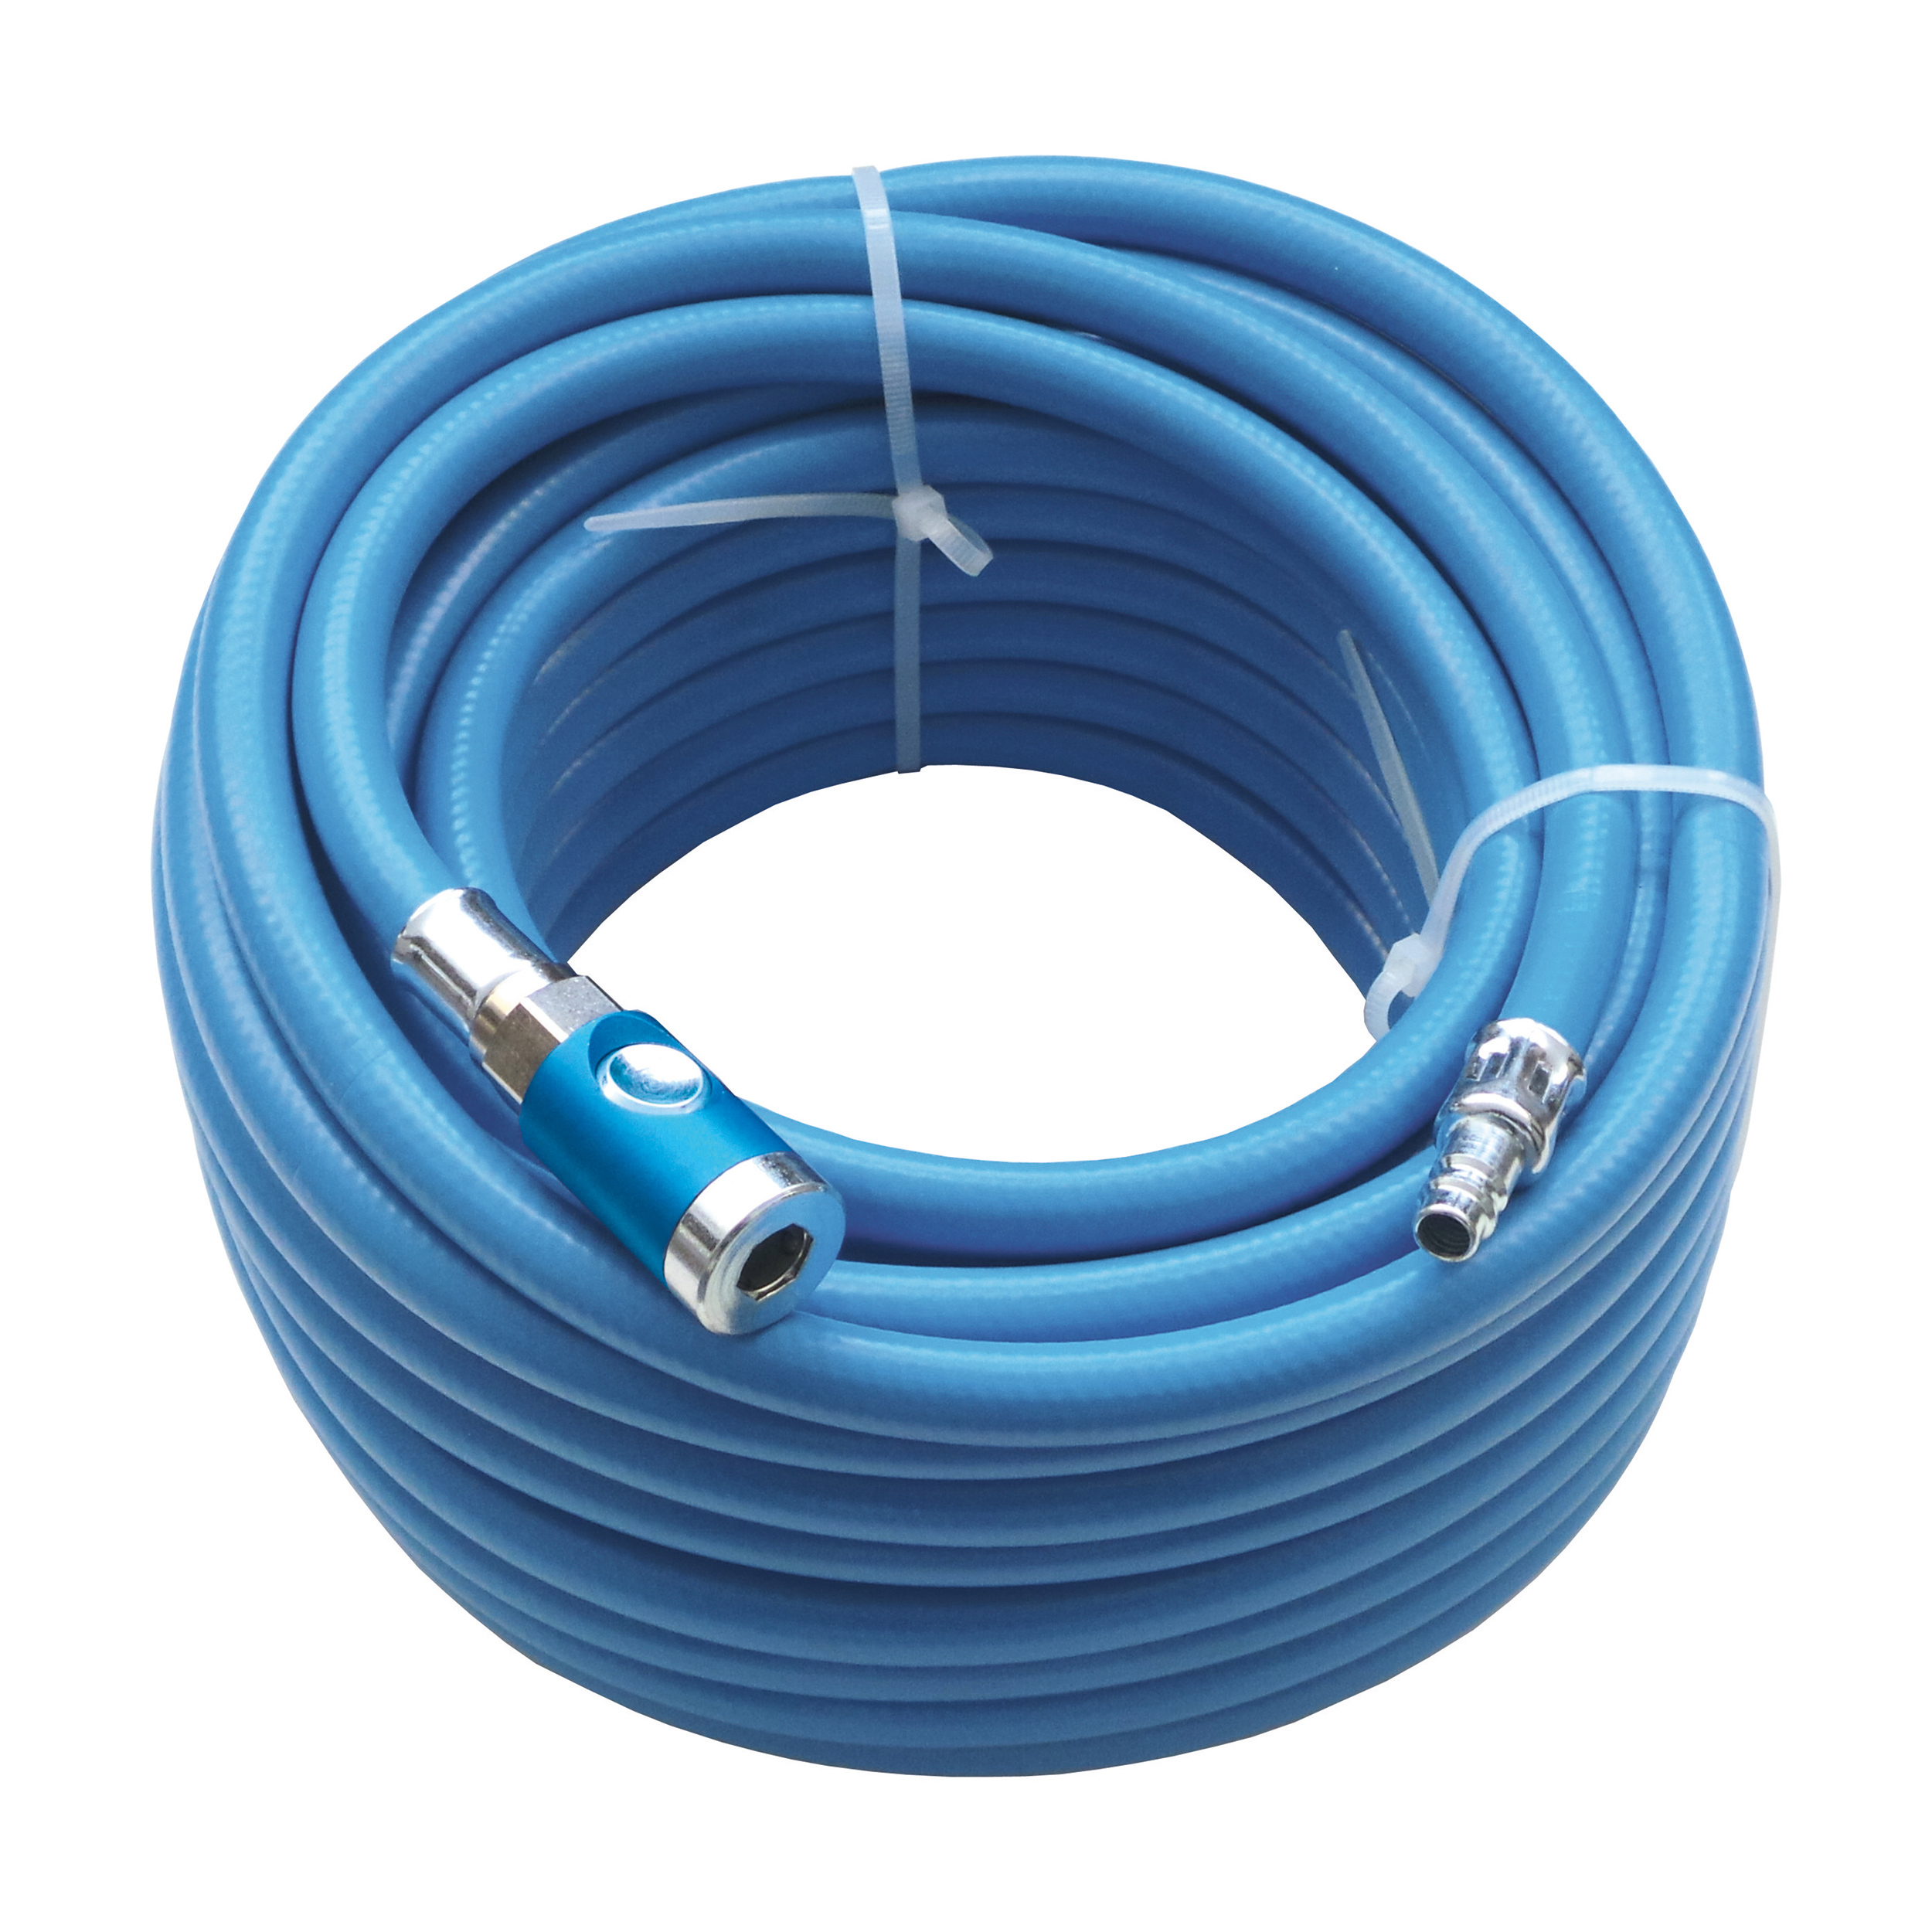 PVC compressed air hose SOFT, Ø9 × 2,75 mm, BR: 32 mm, L: 5 m, assembled completely, DN 7.4 push button safety coupling and plug